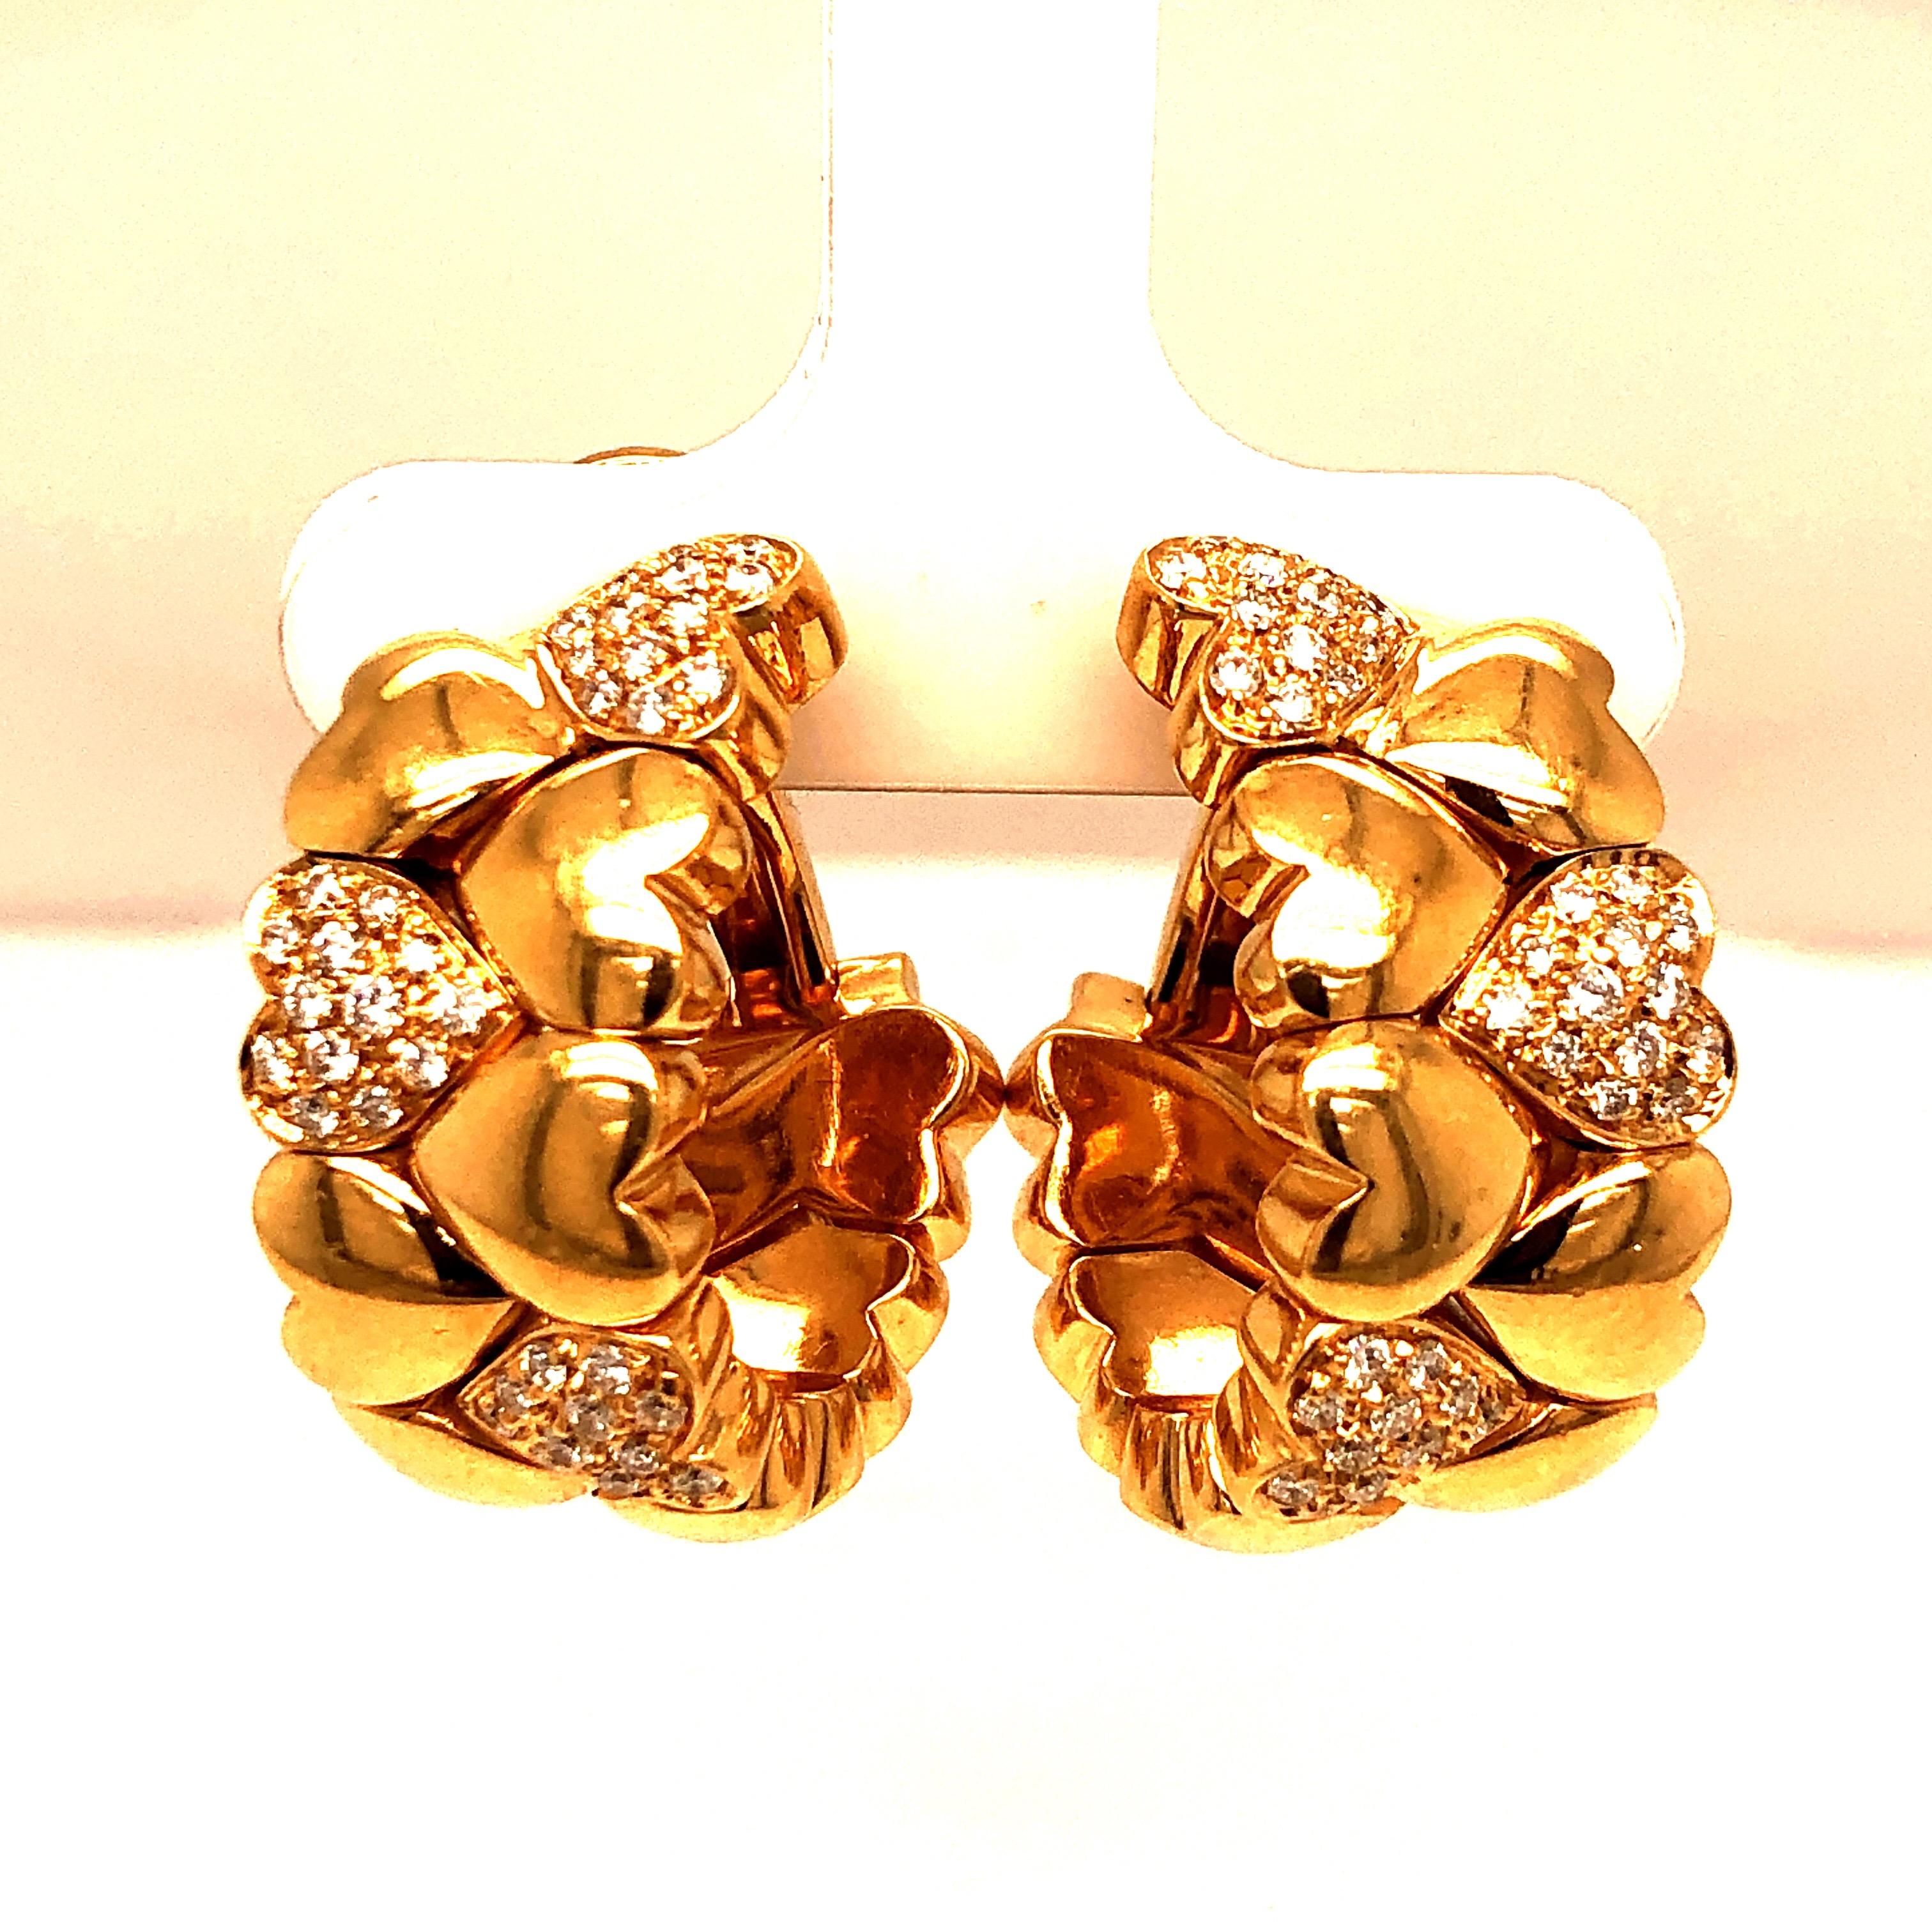 CARTIER DIAMOND EARRINGS 18 Karat Yellow Gold with Heart Design Pave'd with Diamonds
Features Omega Clip Backs with Posts for secure wear-ability.
Weight: 31.2 grams. Width:  11.20 mm 
Length:  approximately 20mm or 3/4 inches 
Set with :